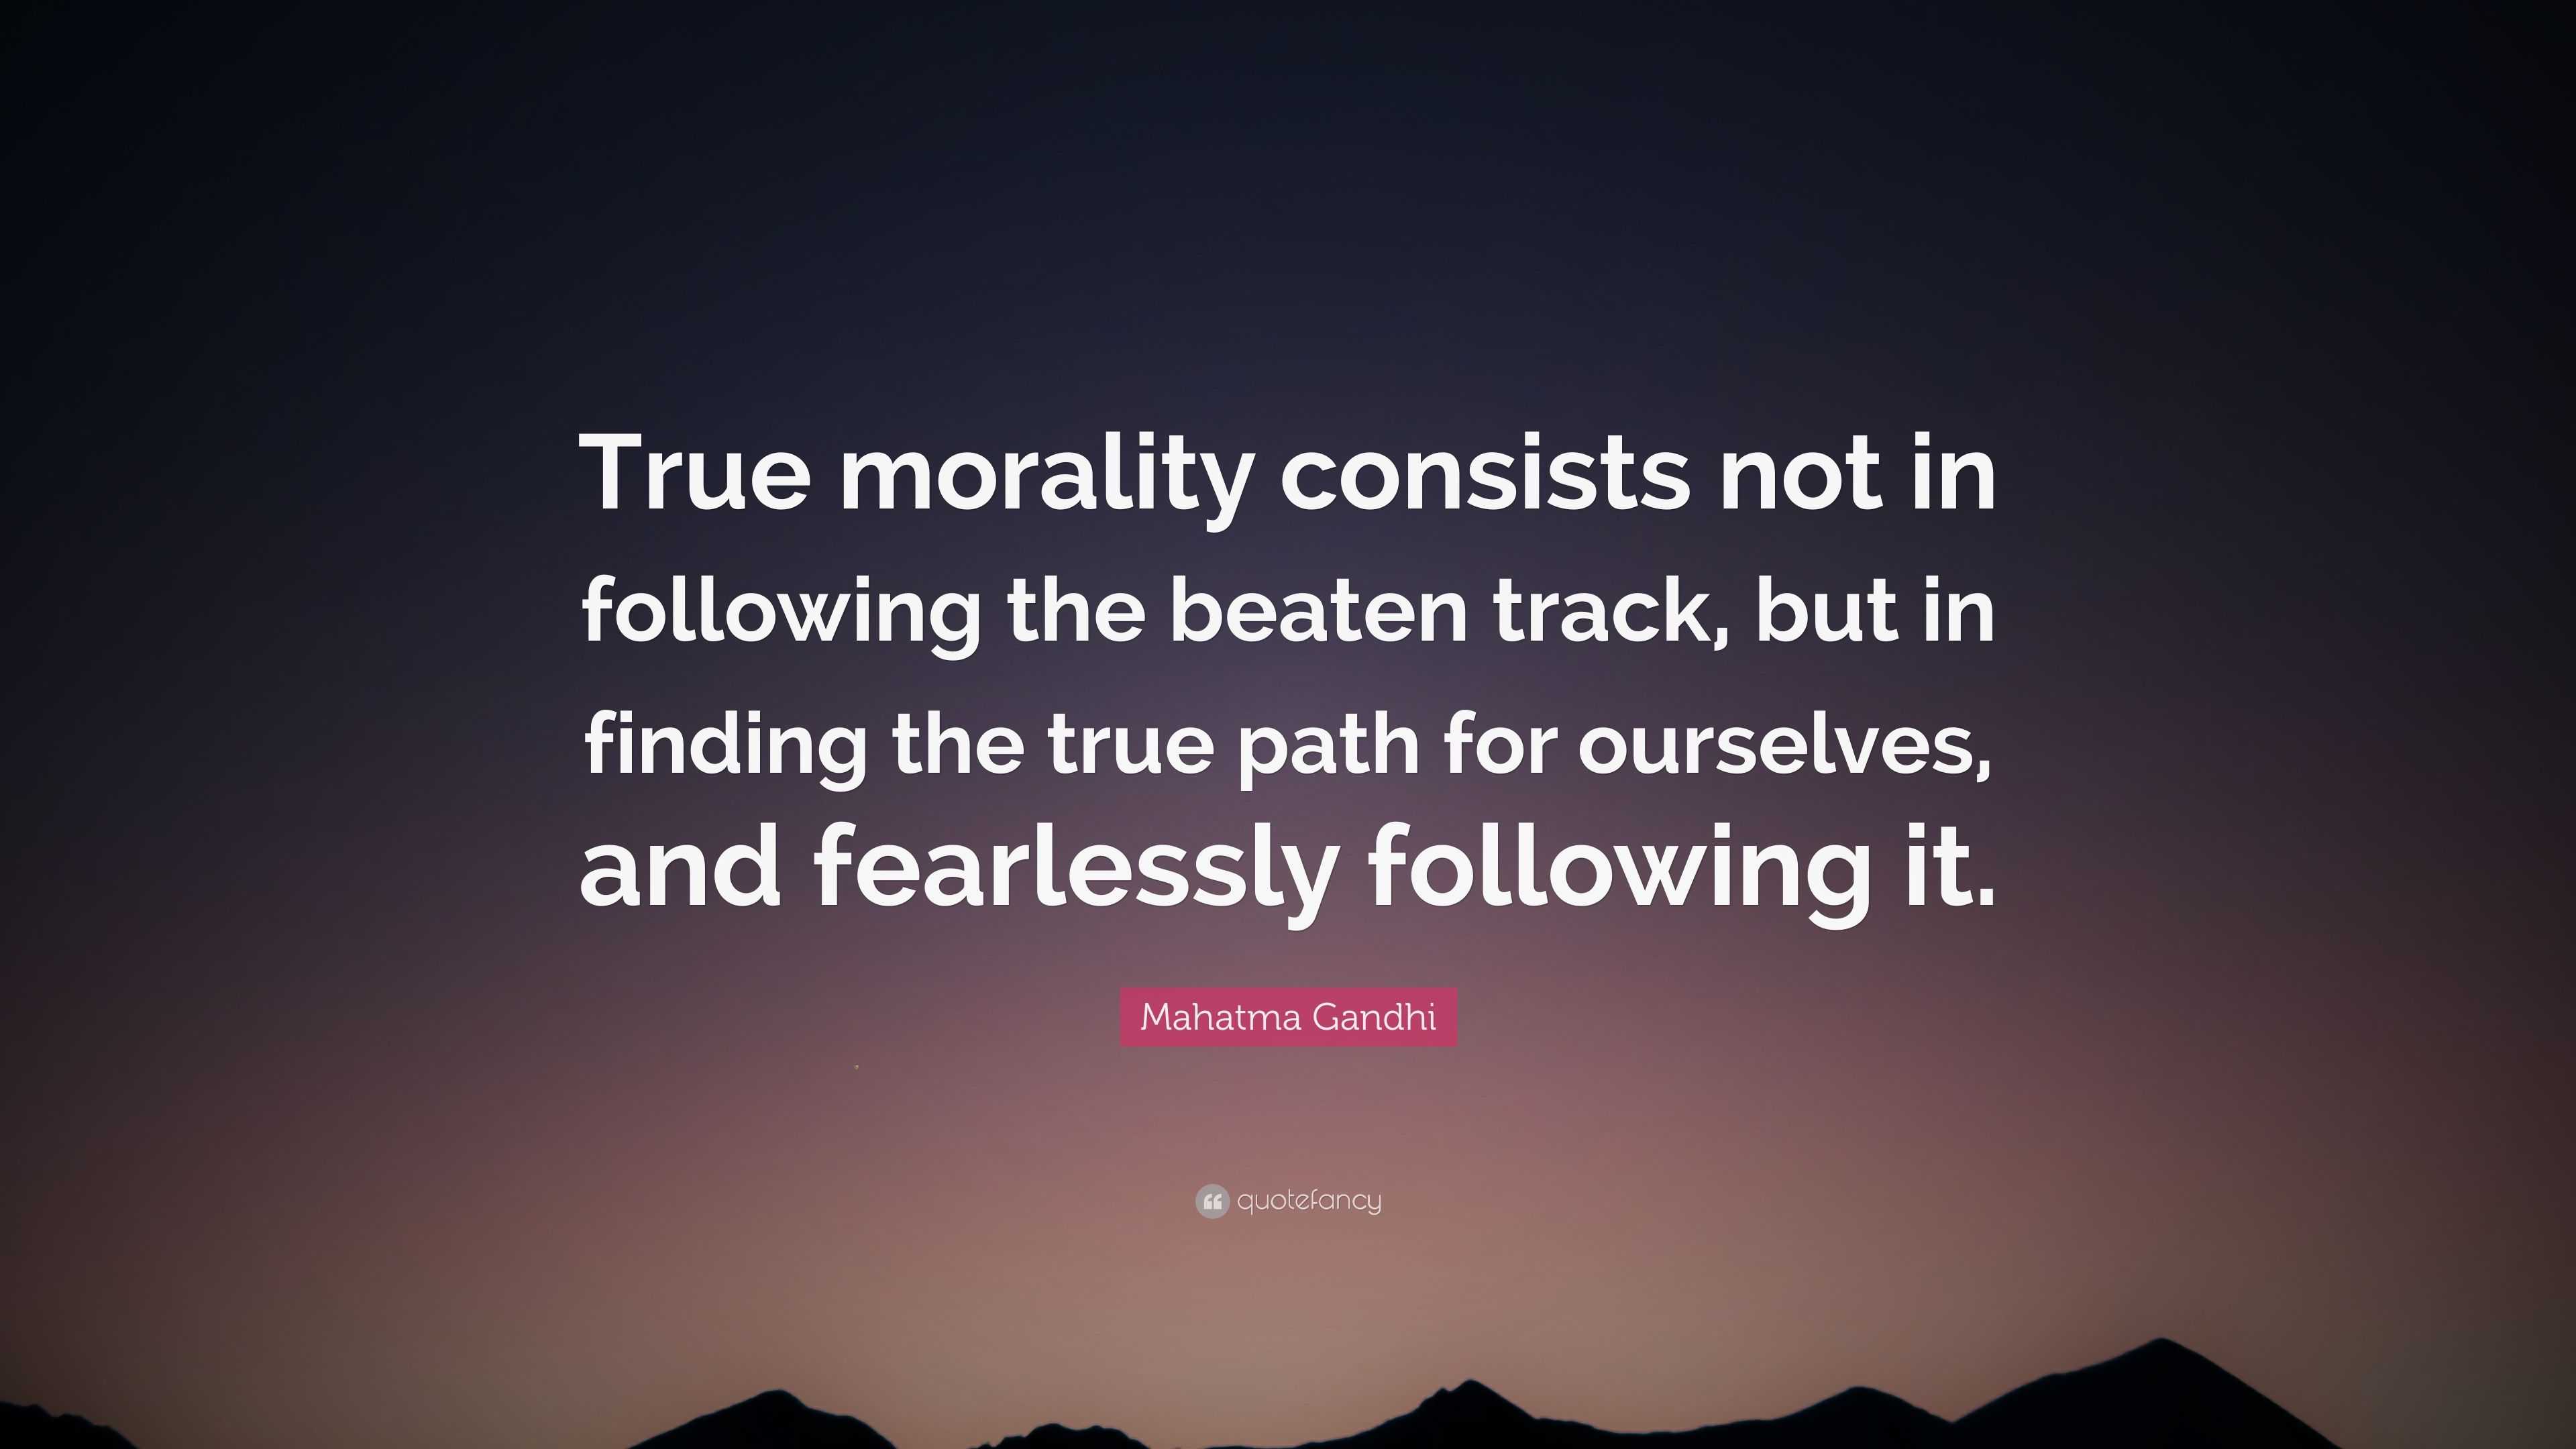 Mahatma Gandhi Quote: “True morality consists not in following the ... Good Selfless Quotes